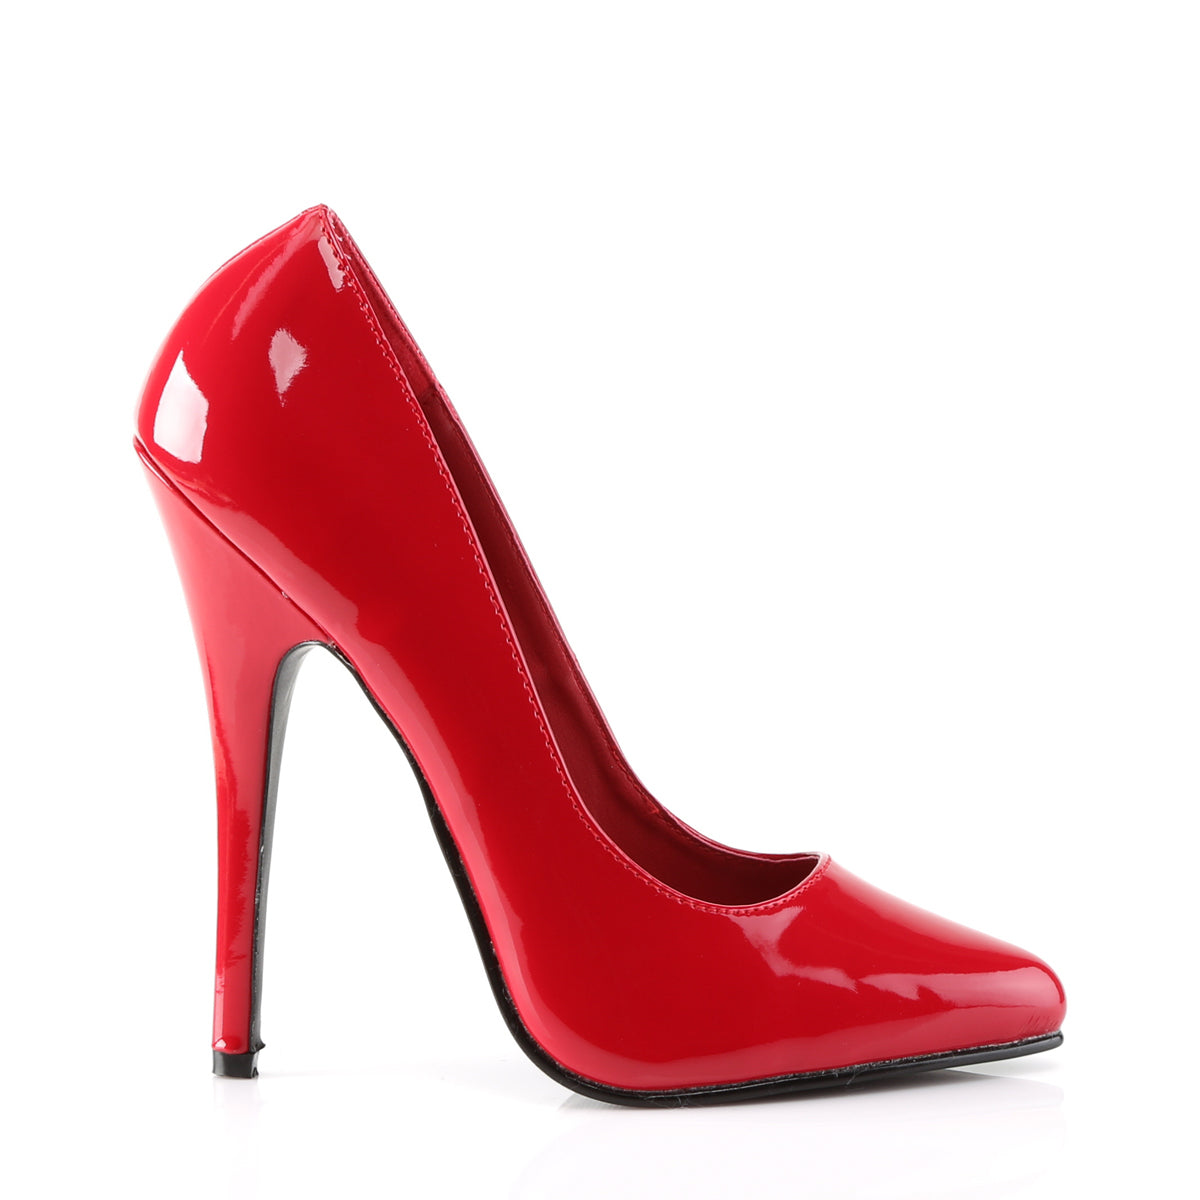 Devious Womens Pumps DOMINA-420 Red Pat